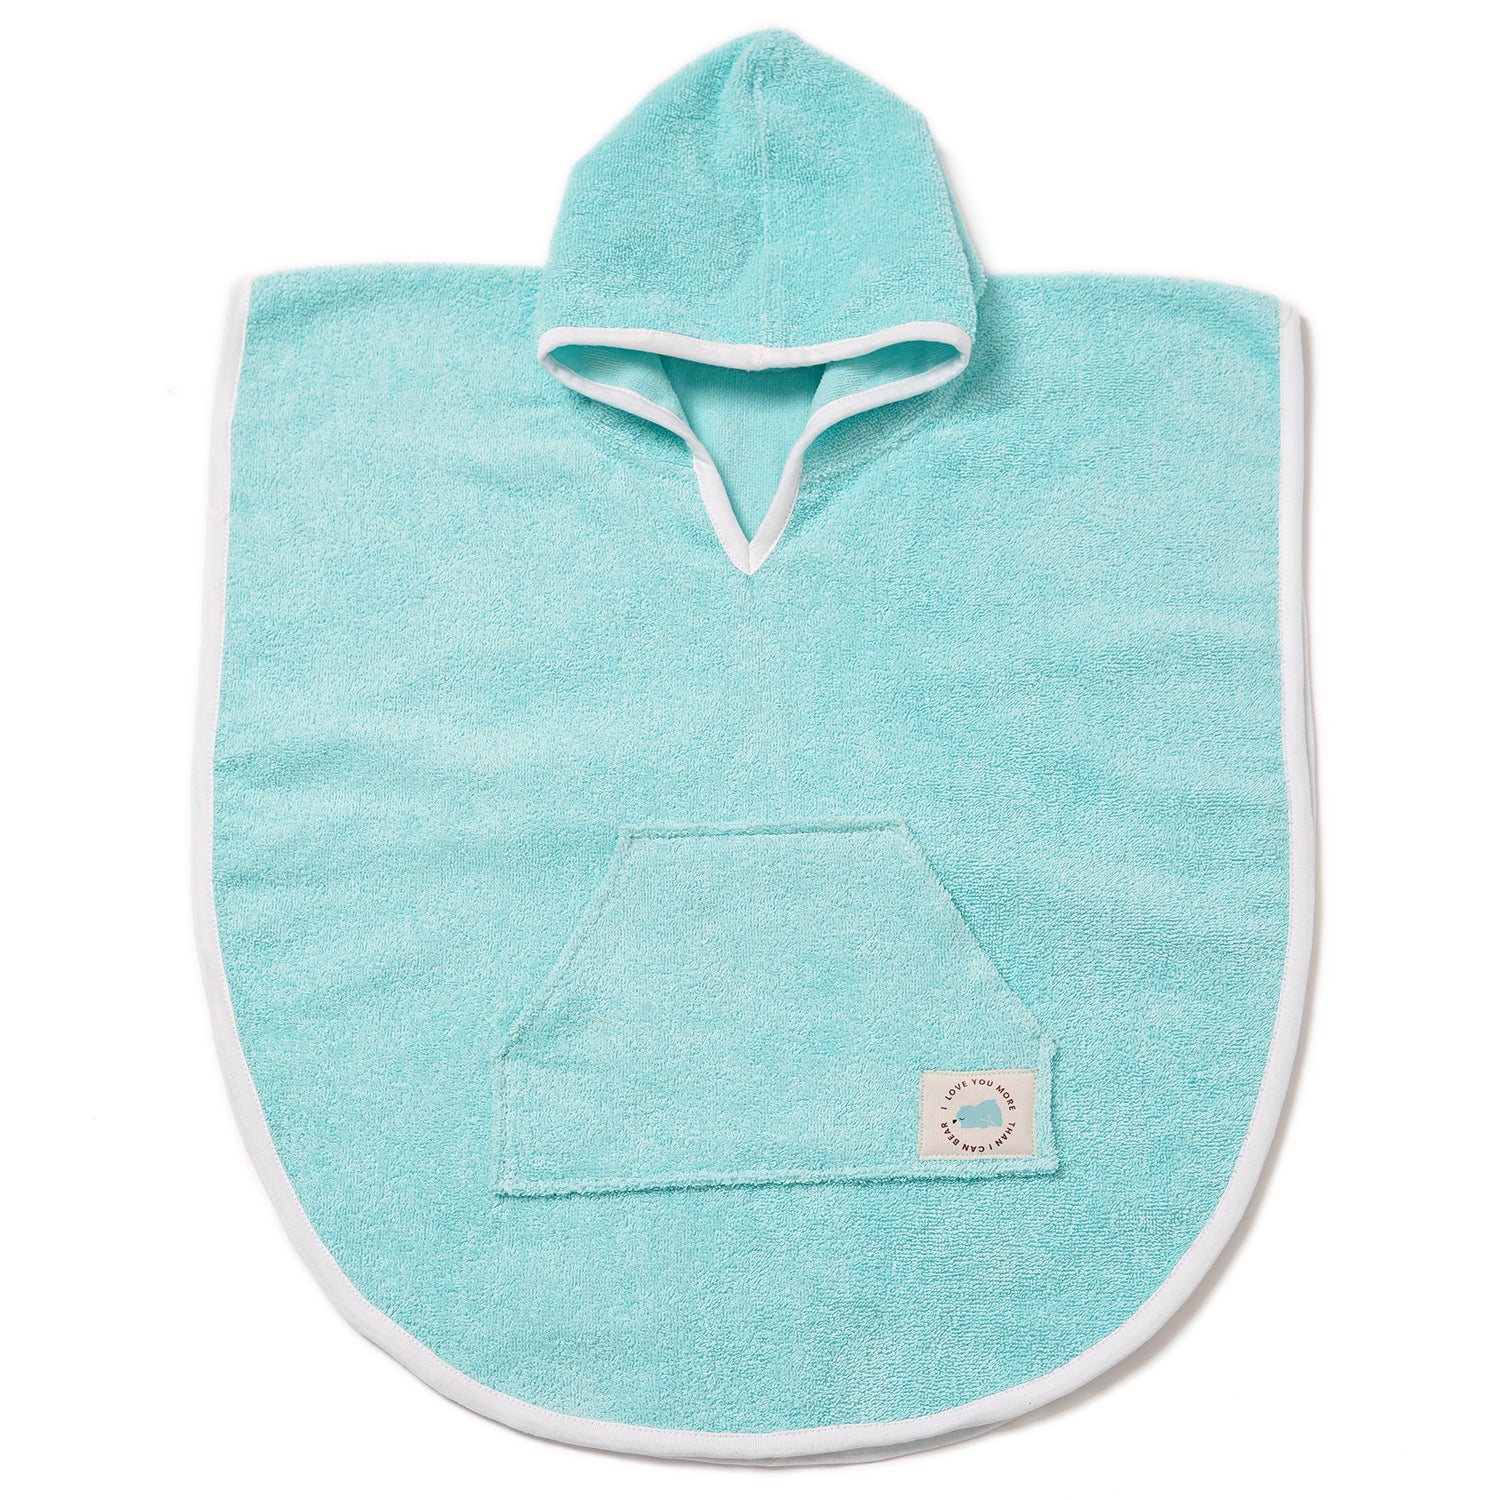 100% Cotton Woven Baby Poncho Towel Soft and Absorbent Hooded Towel (Baby Blue)